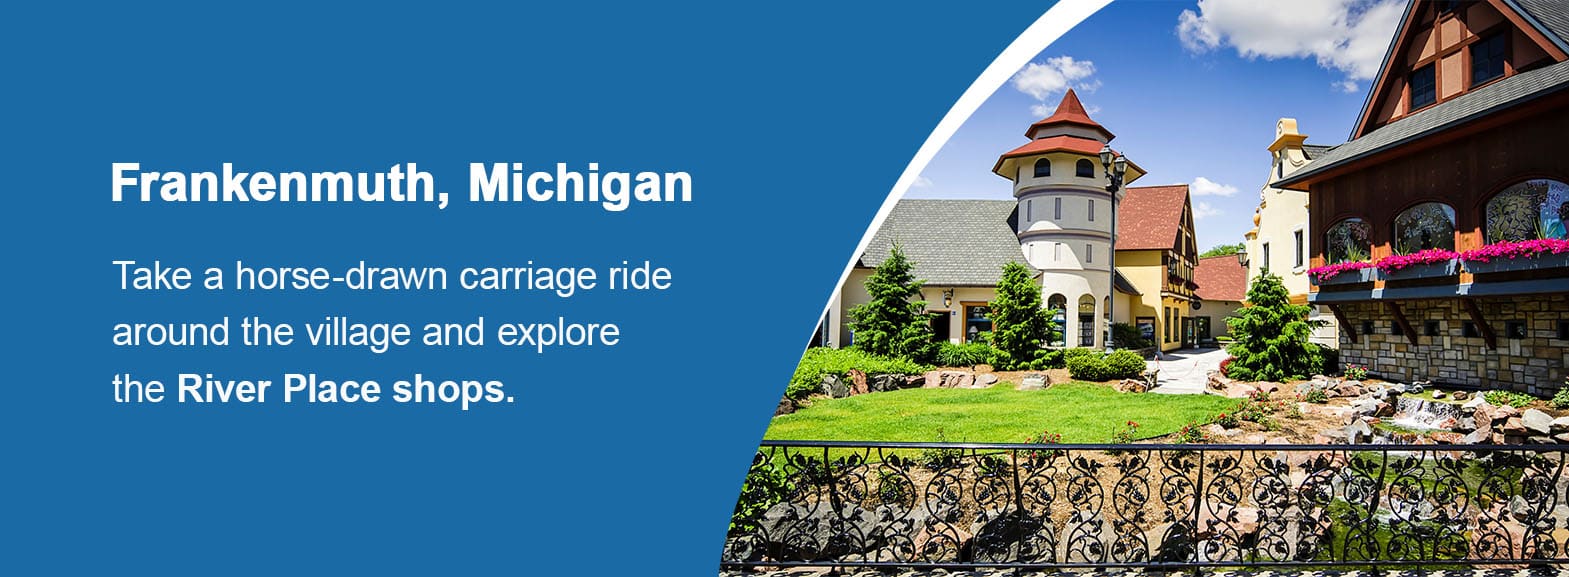 Frankenmuth, Michigan. Take a horse-drawn carriage ride around the village and explore the River Place shops. 